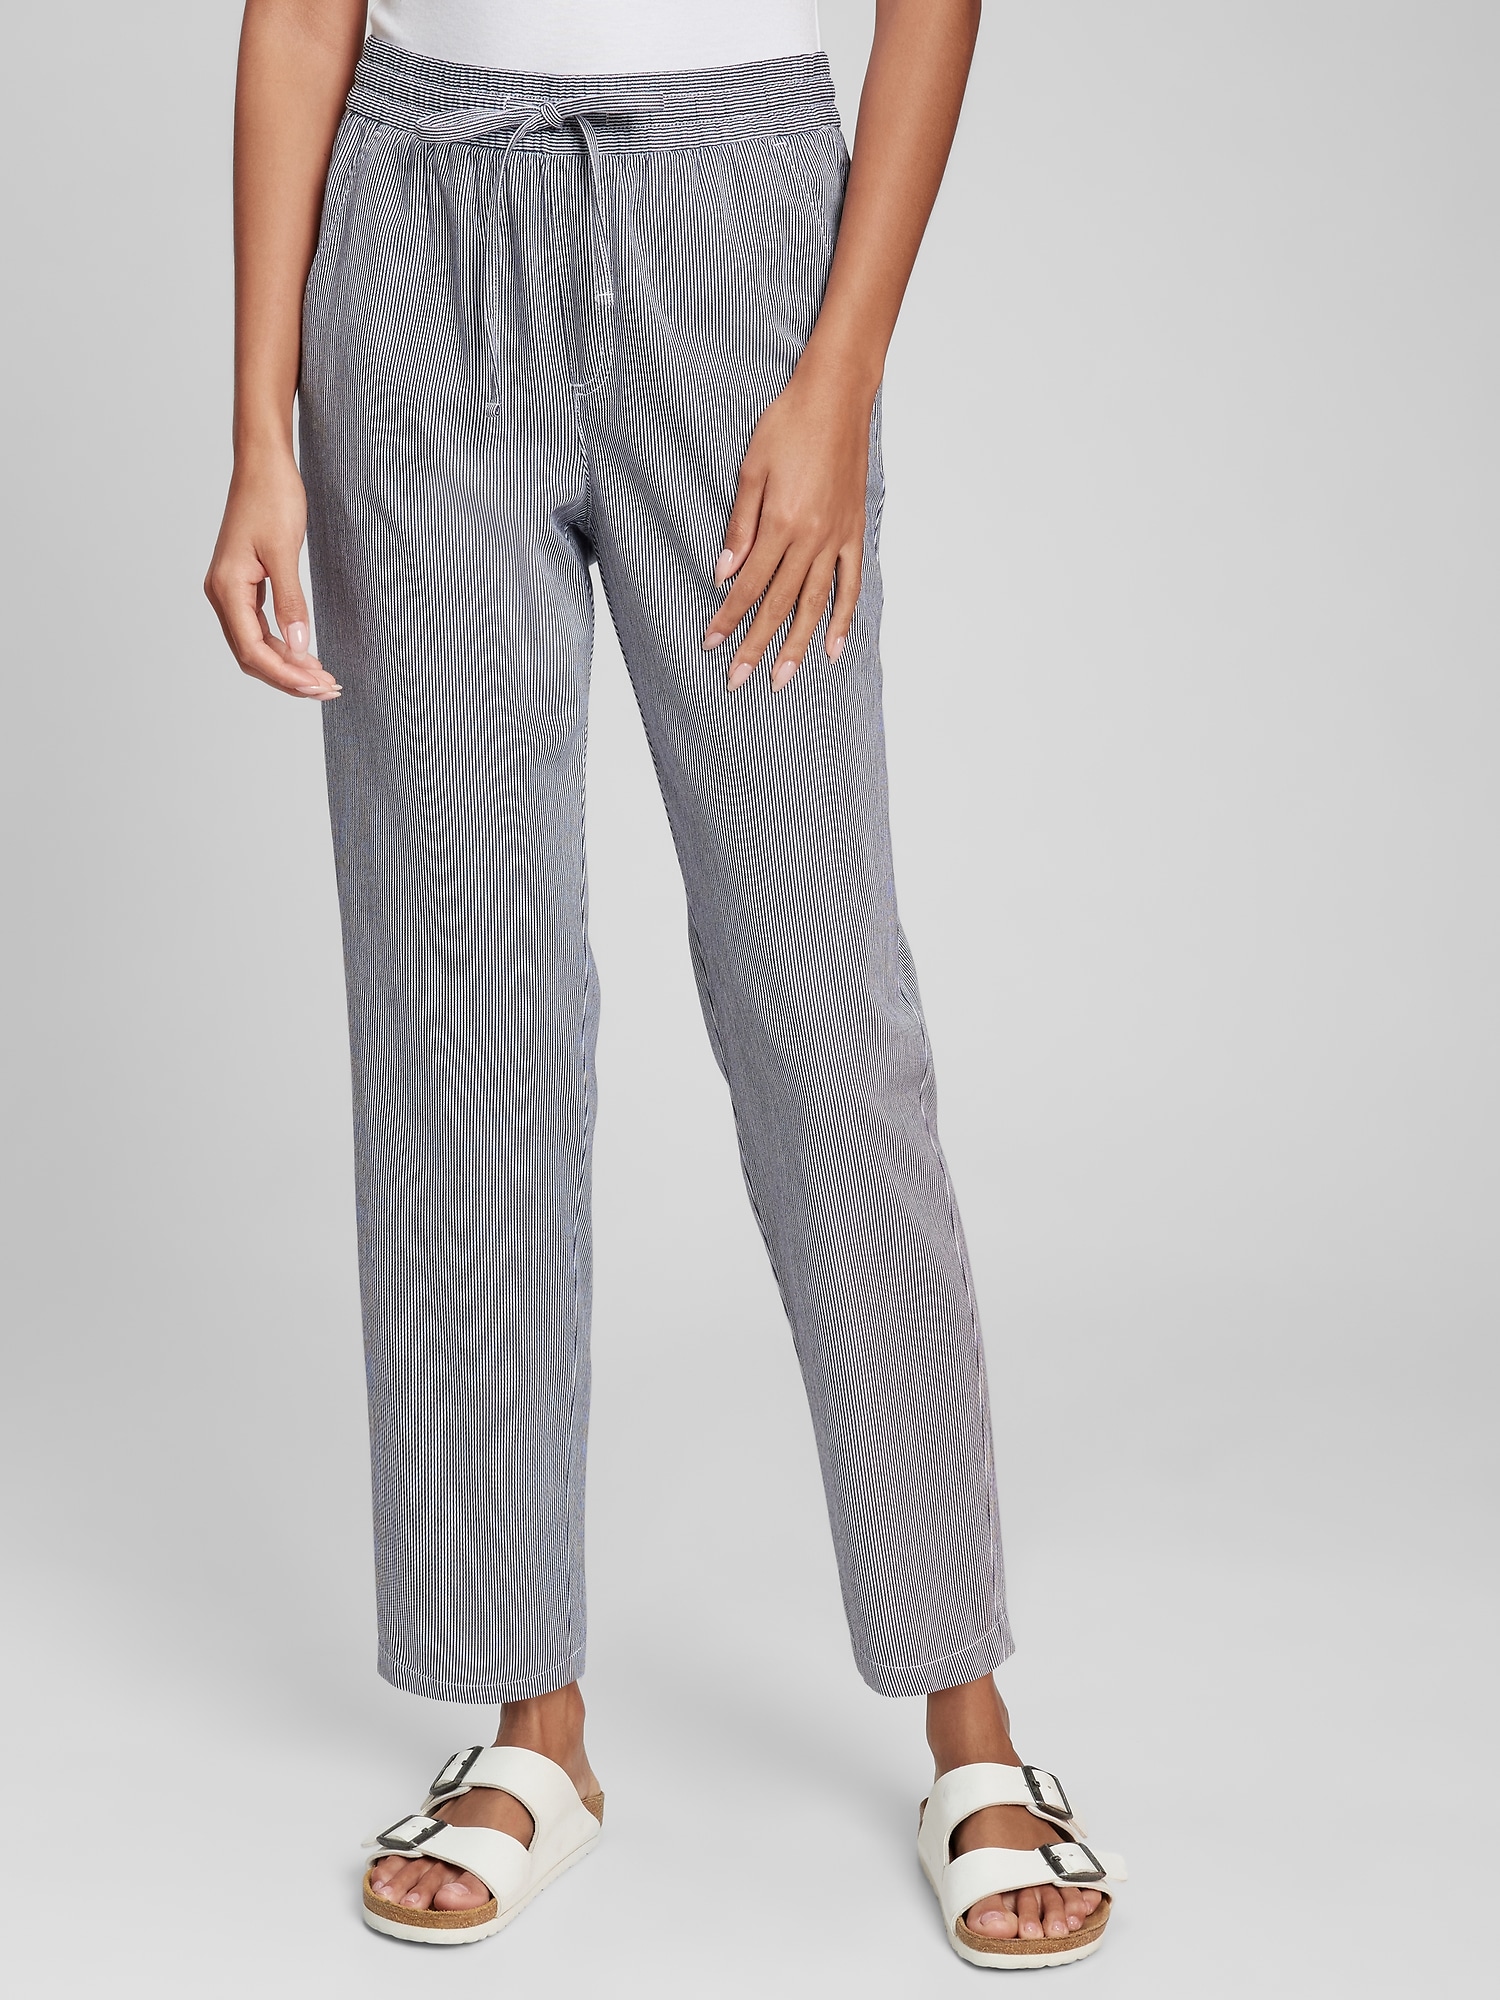 Twill Easy Pants with Washwell | Gap Factory